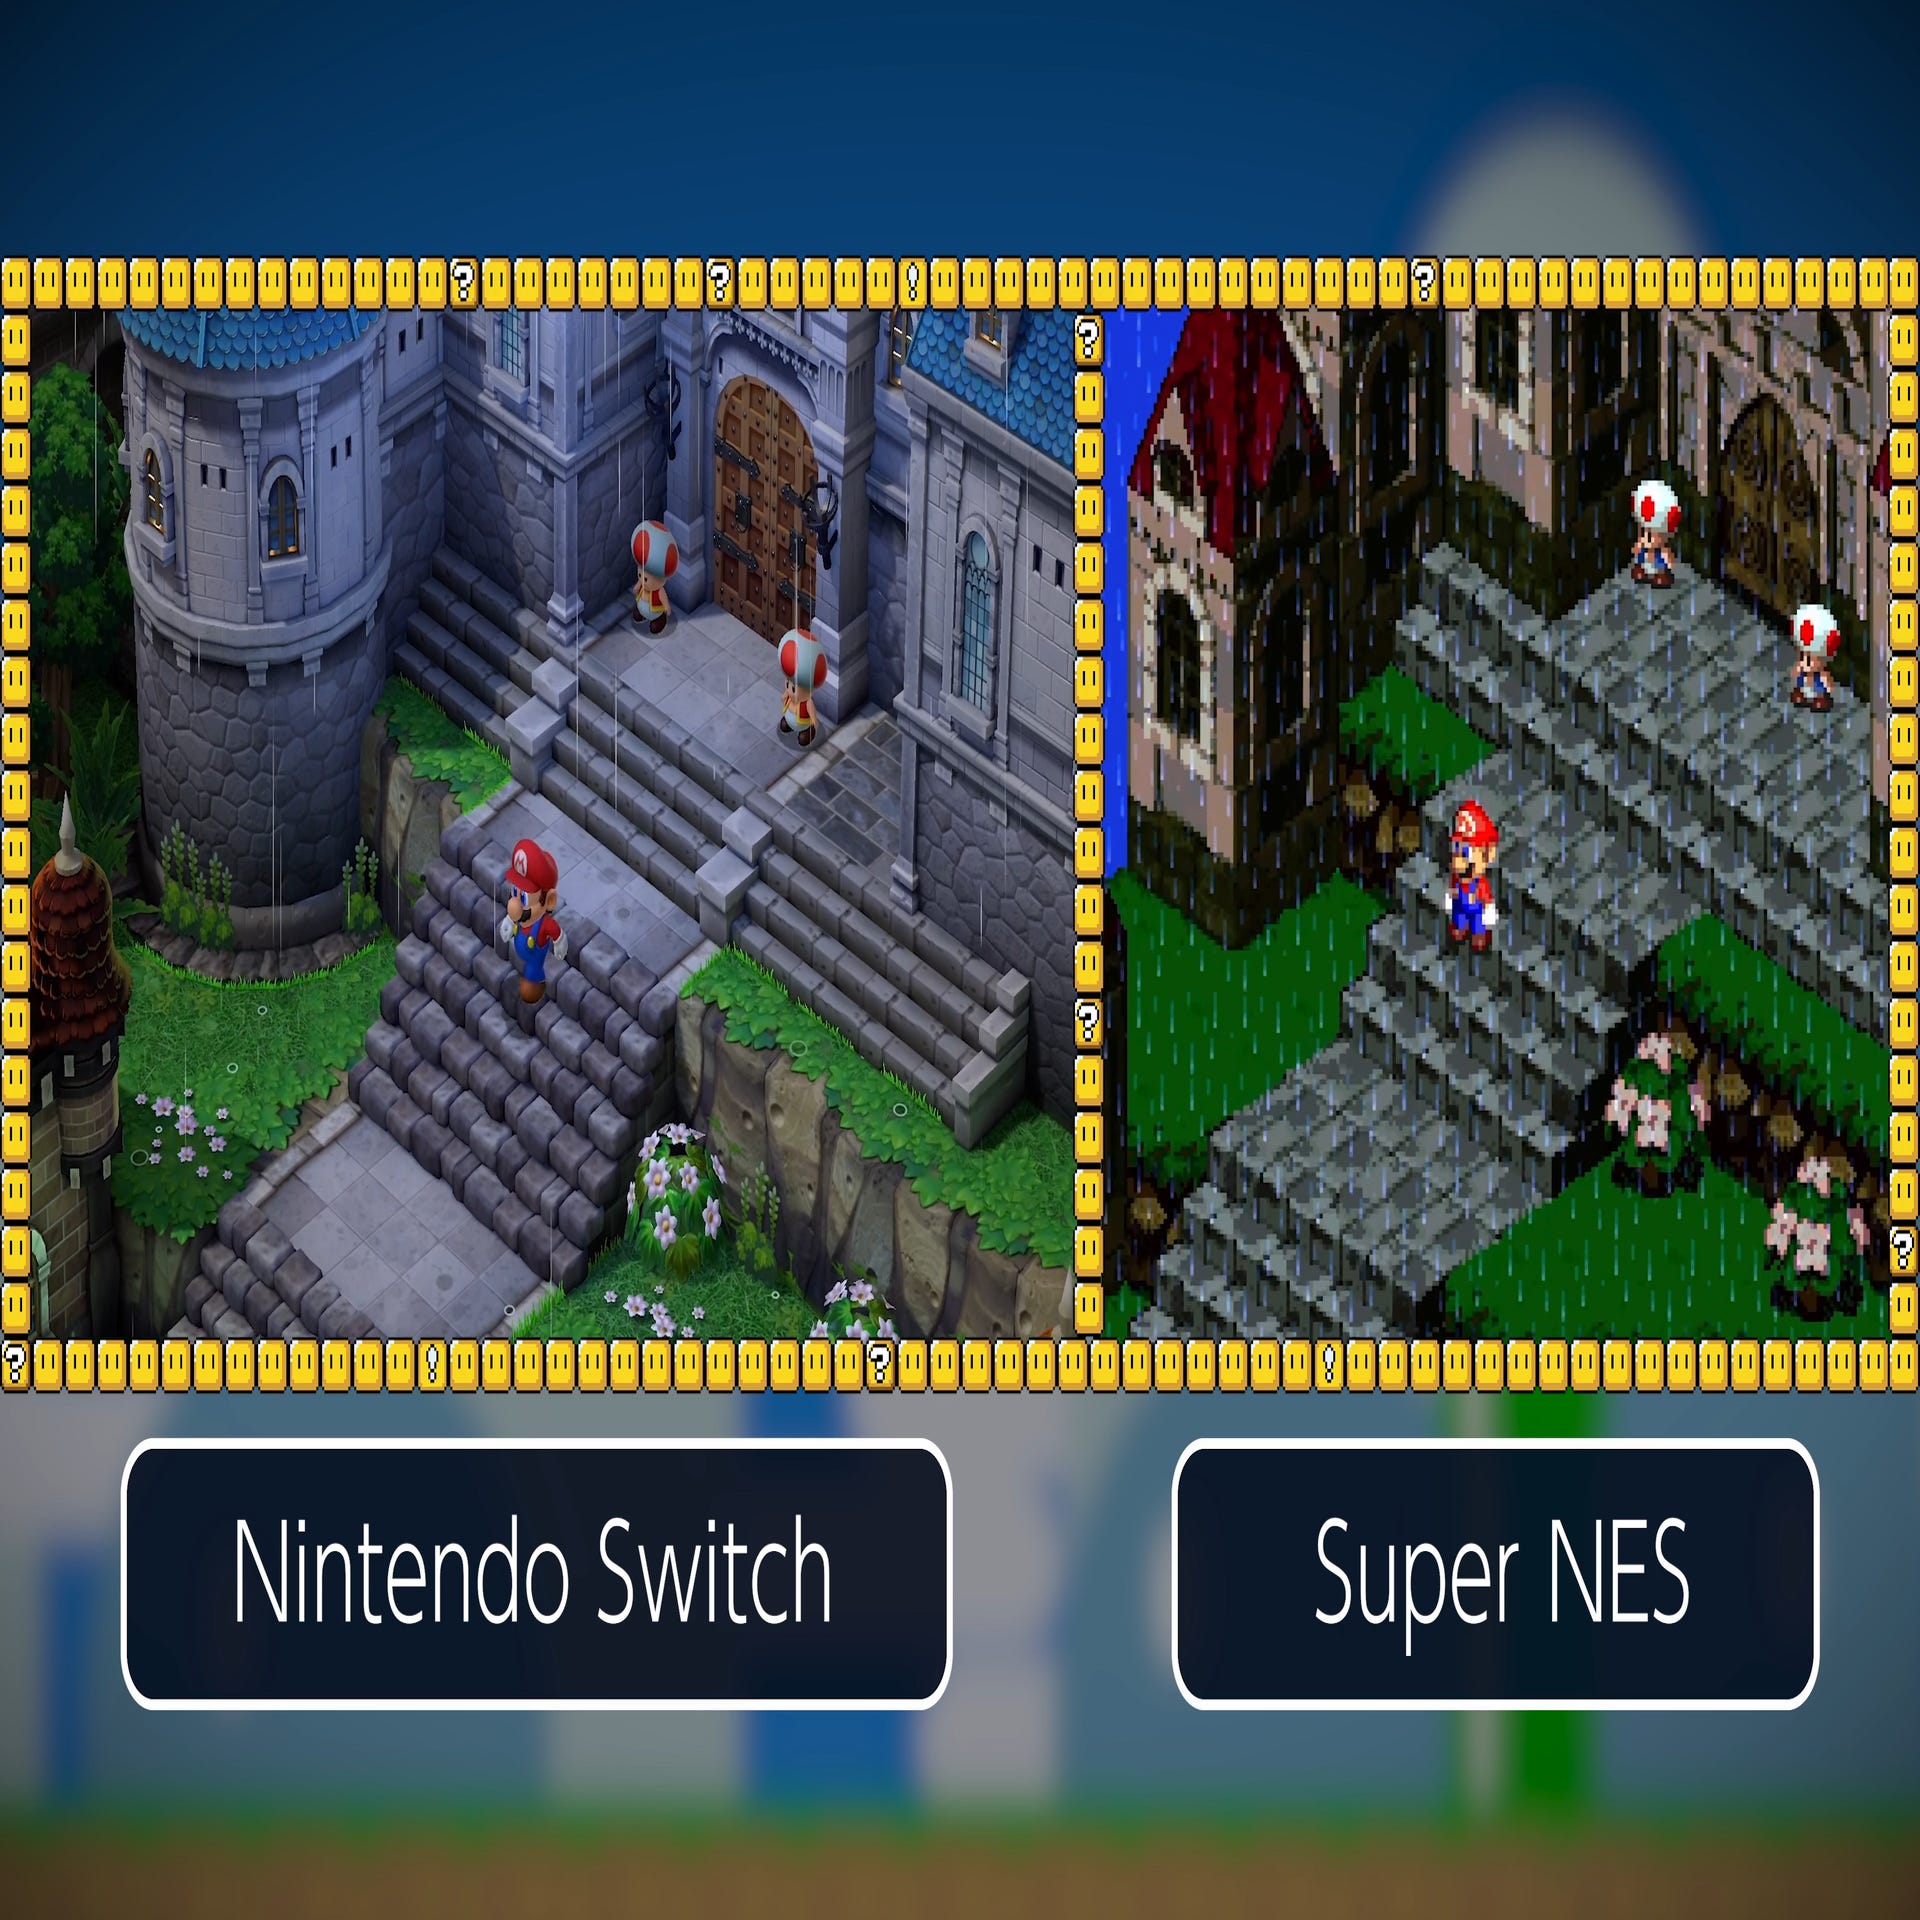 Super Mario RPG's updates are looking both whimsical and